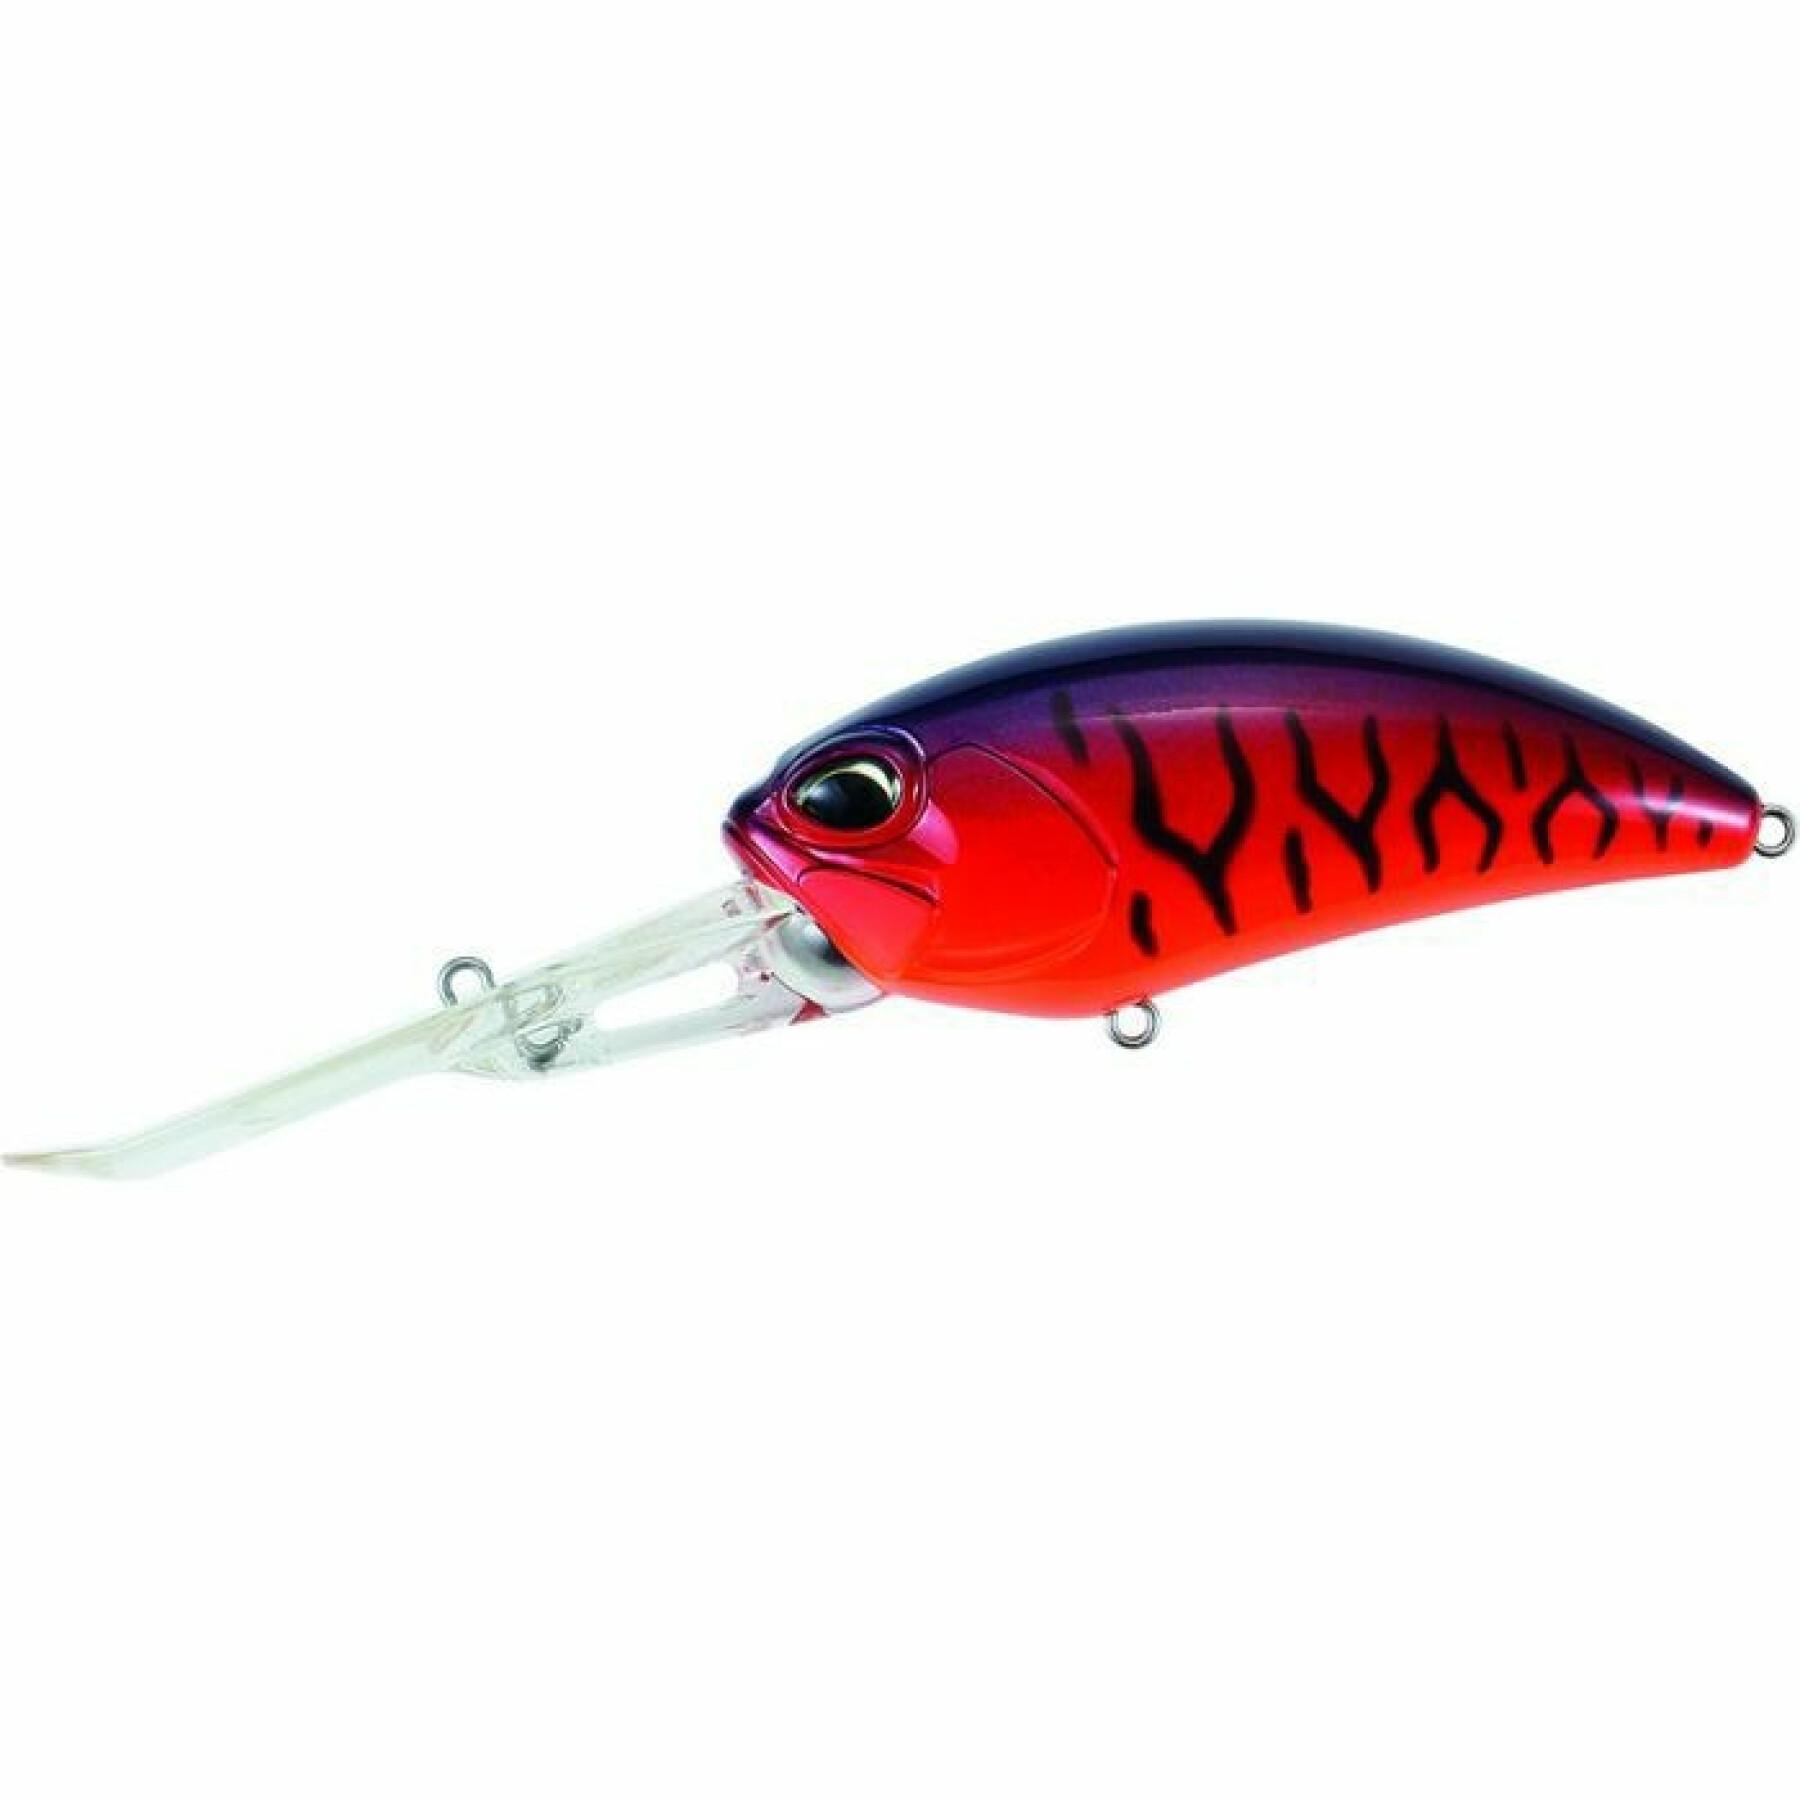 Duo crank lure g87 20a - 31g